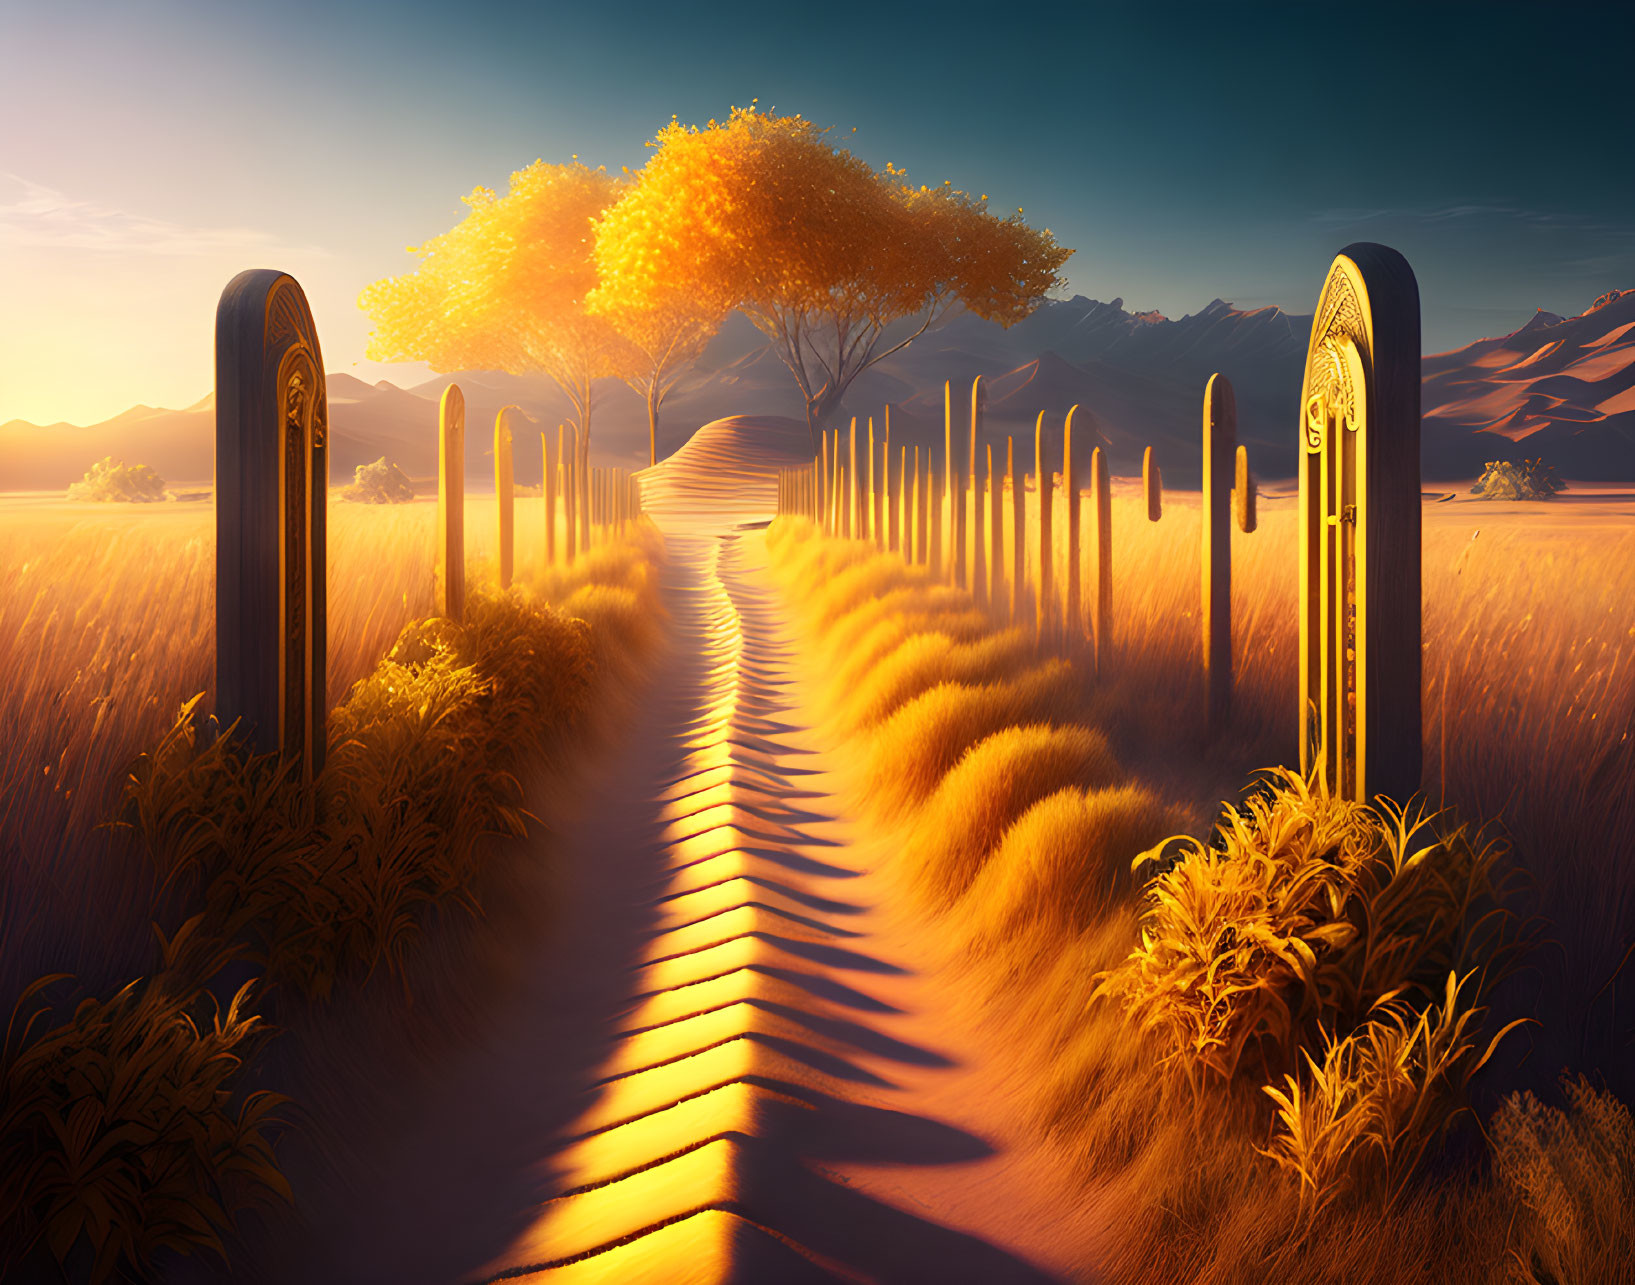 A golden path leads to heaven